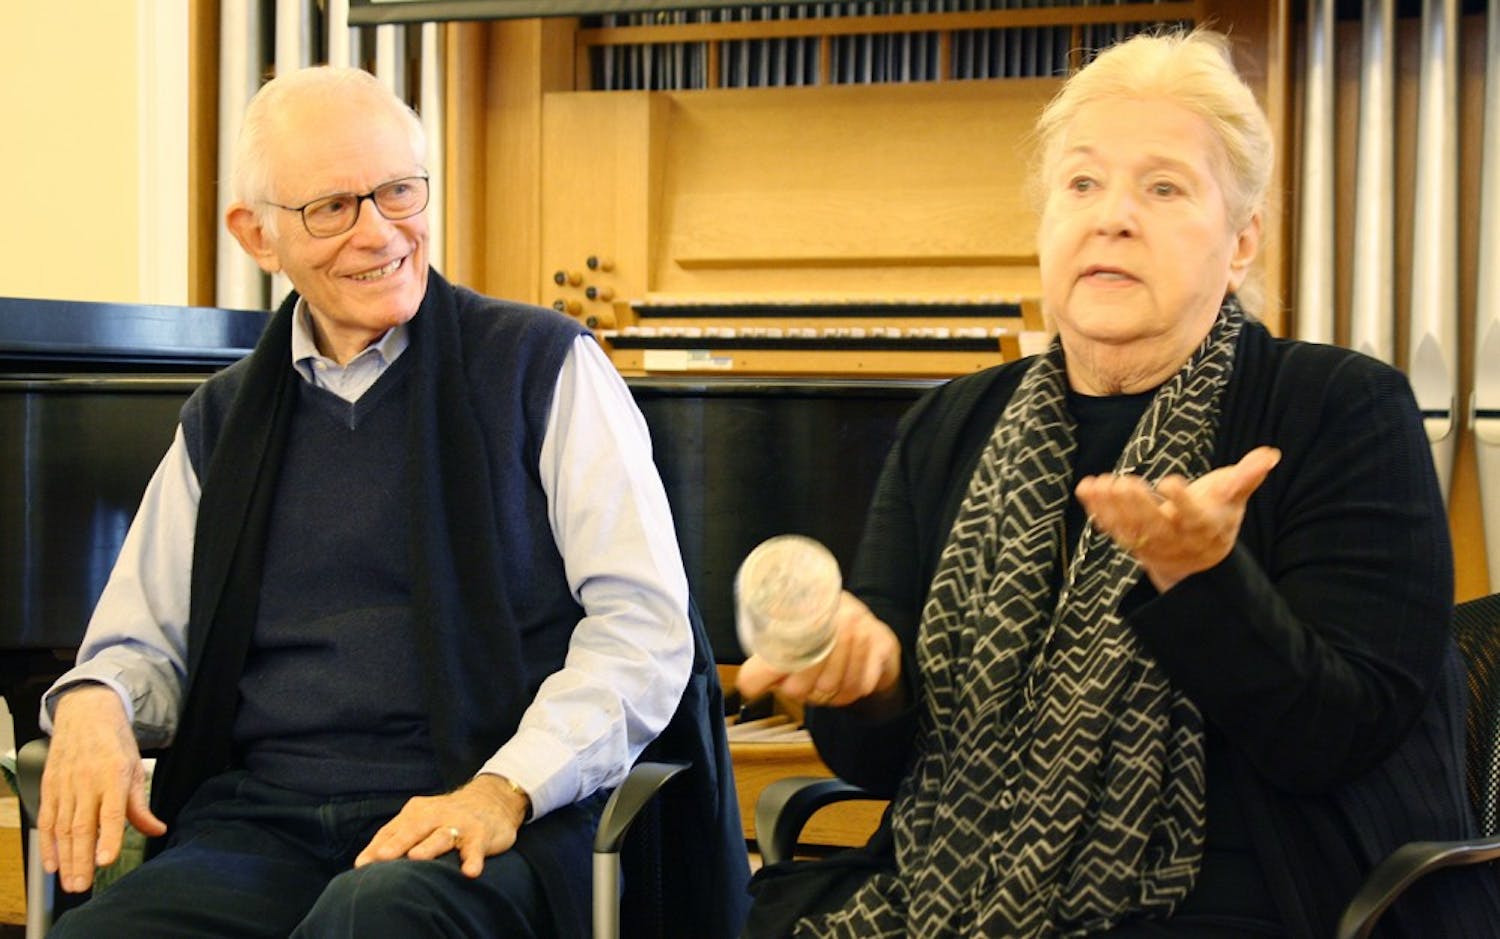 Photo: UNC to honor Alan and Marilyn Bergman with gala concert (Katherine Proctor)